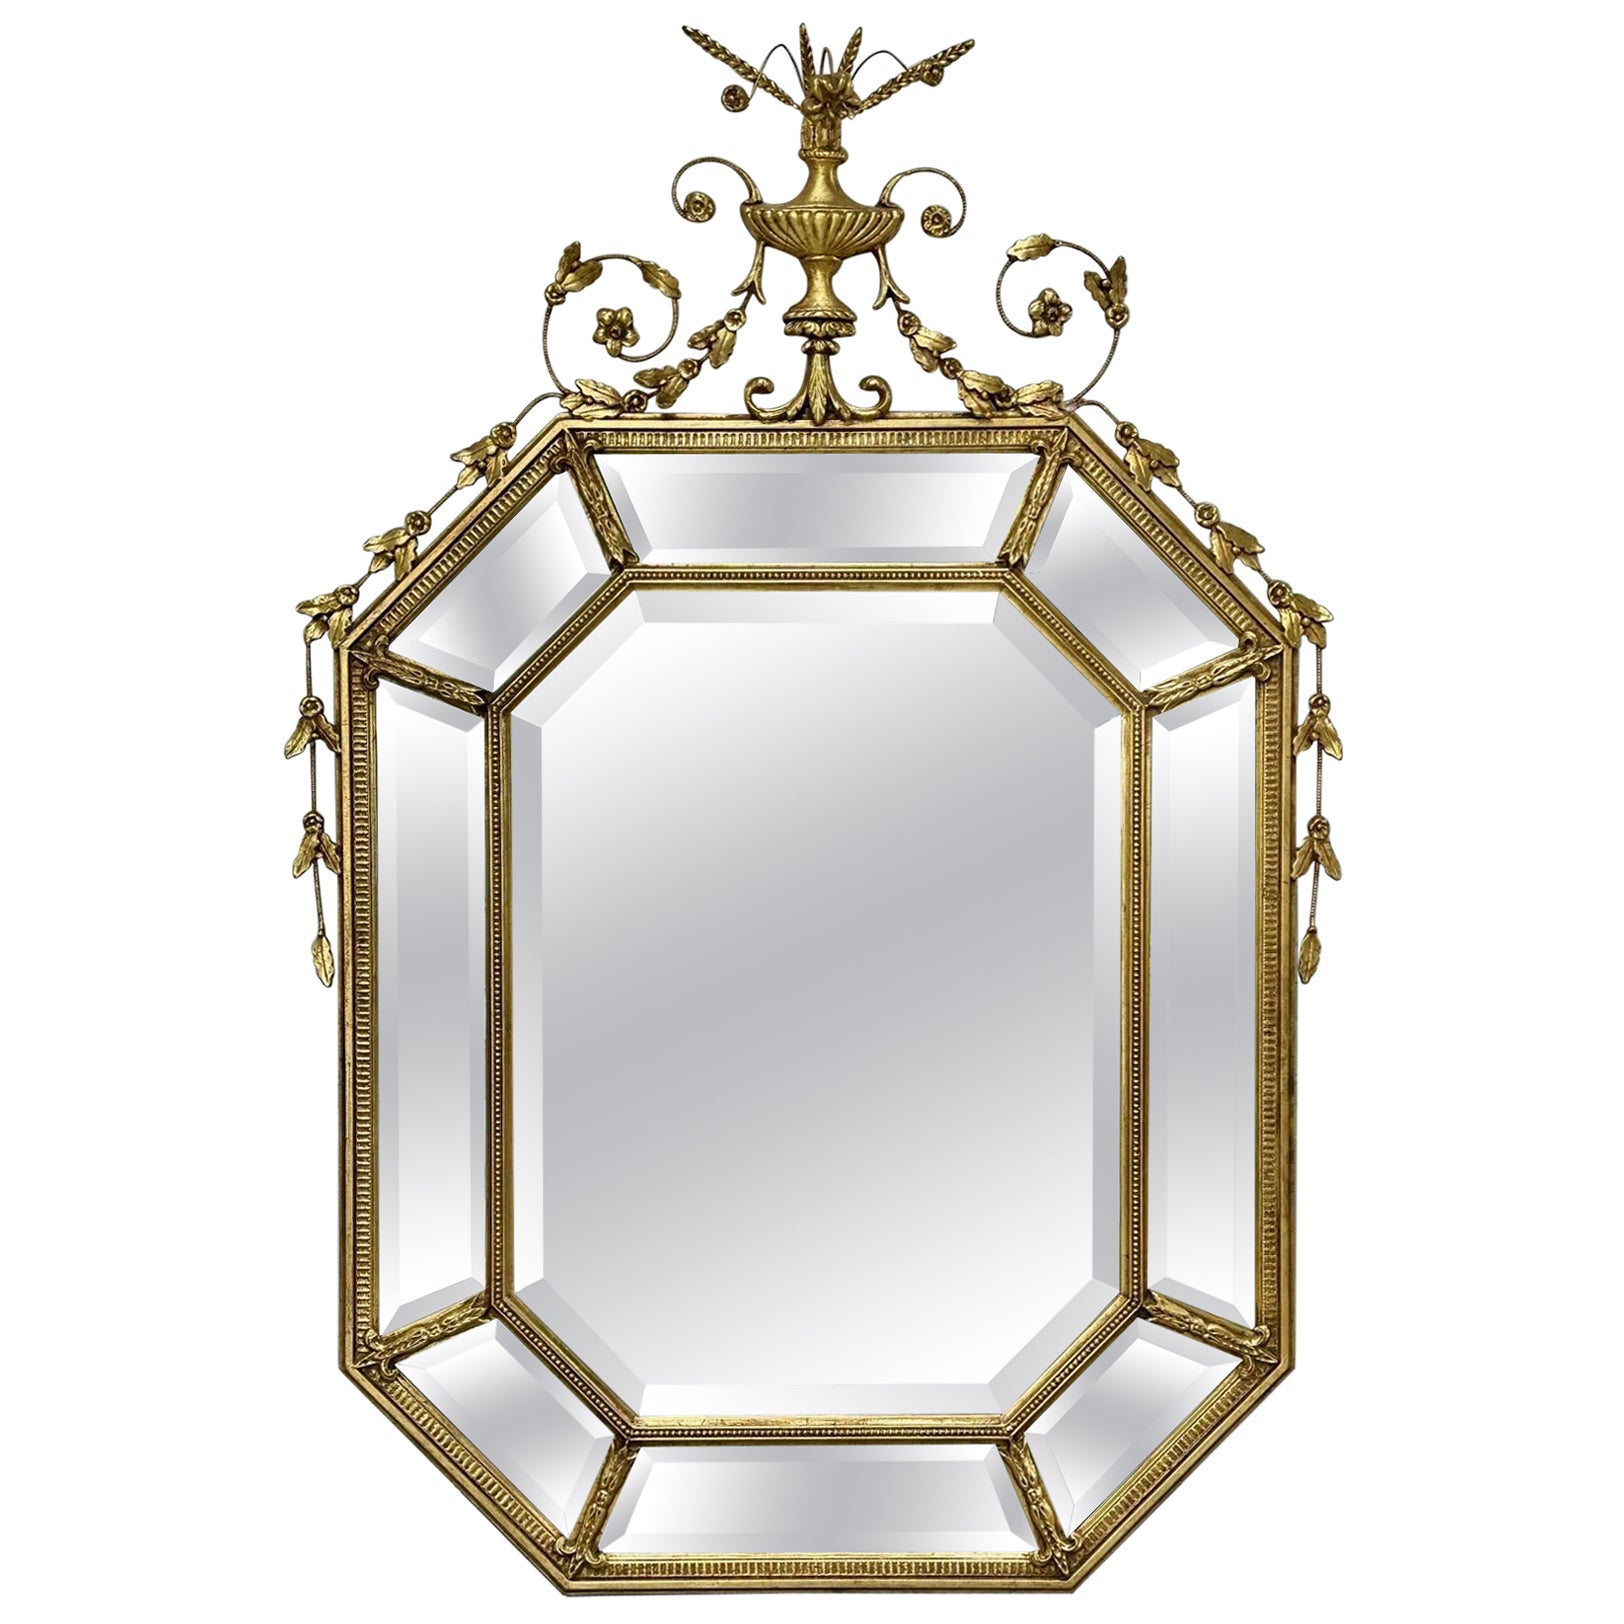 Large Adams Style Carved Giltwood Octagonal Wall Mirror.